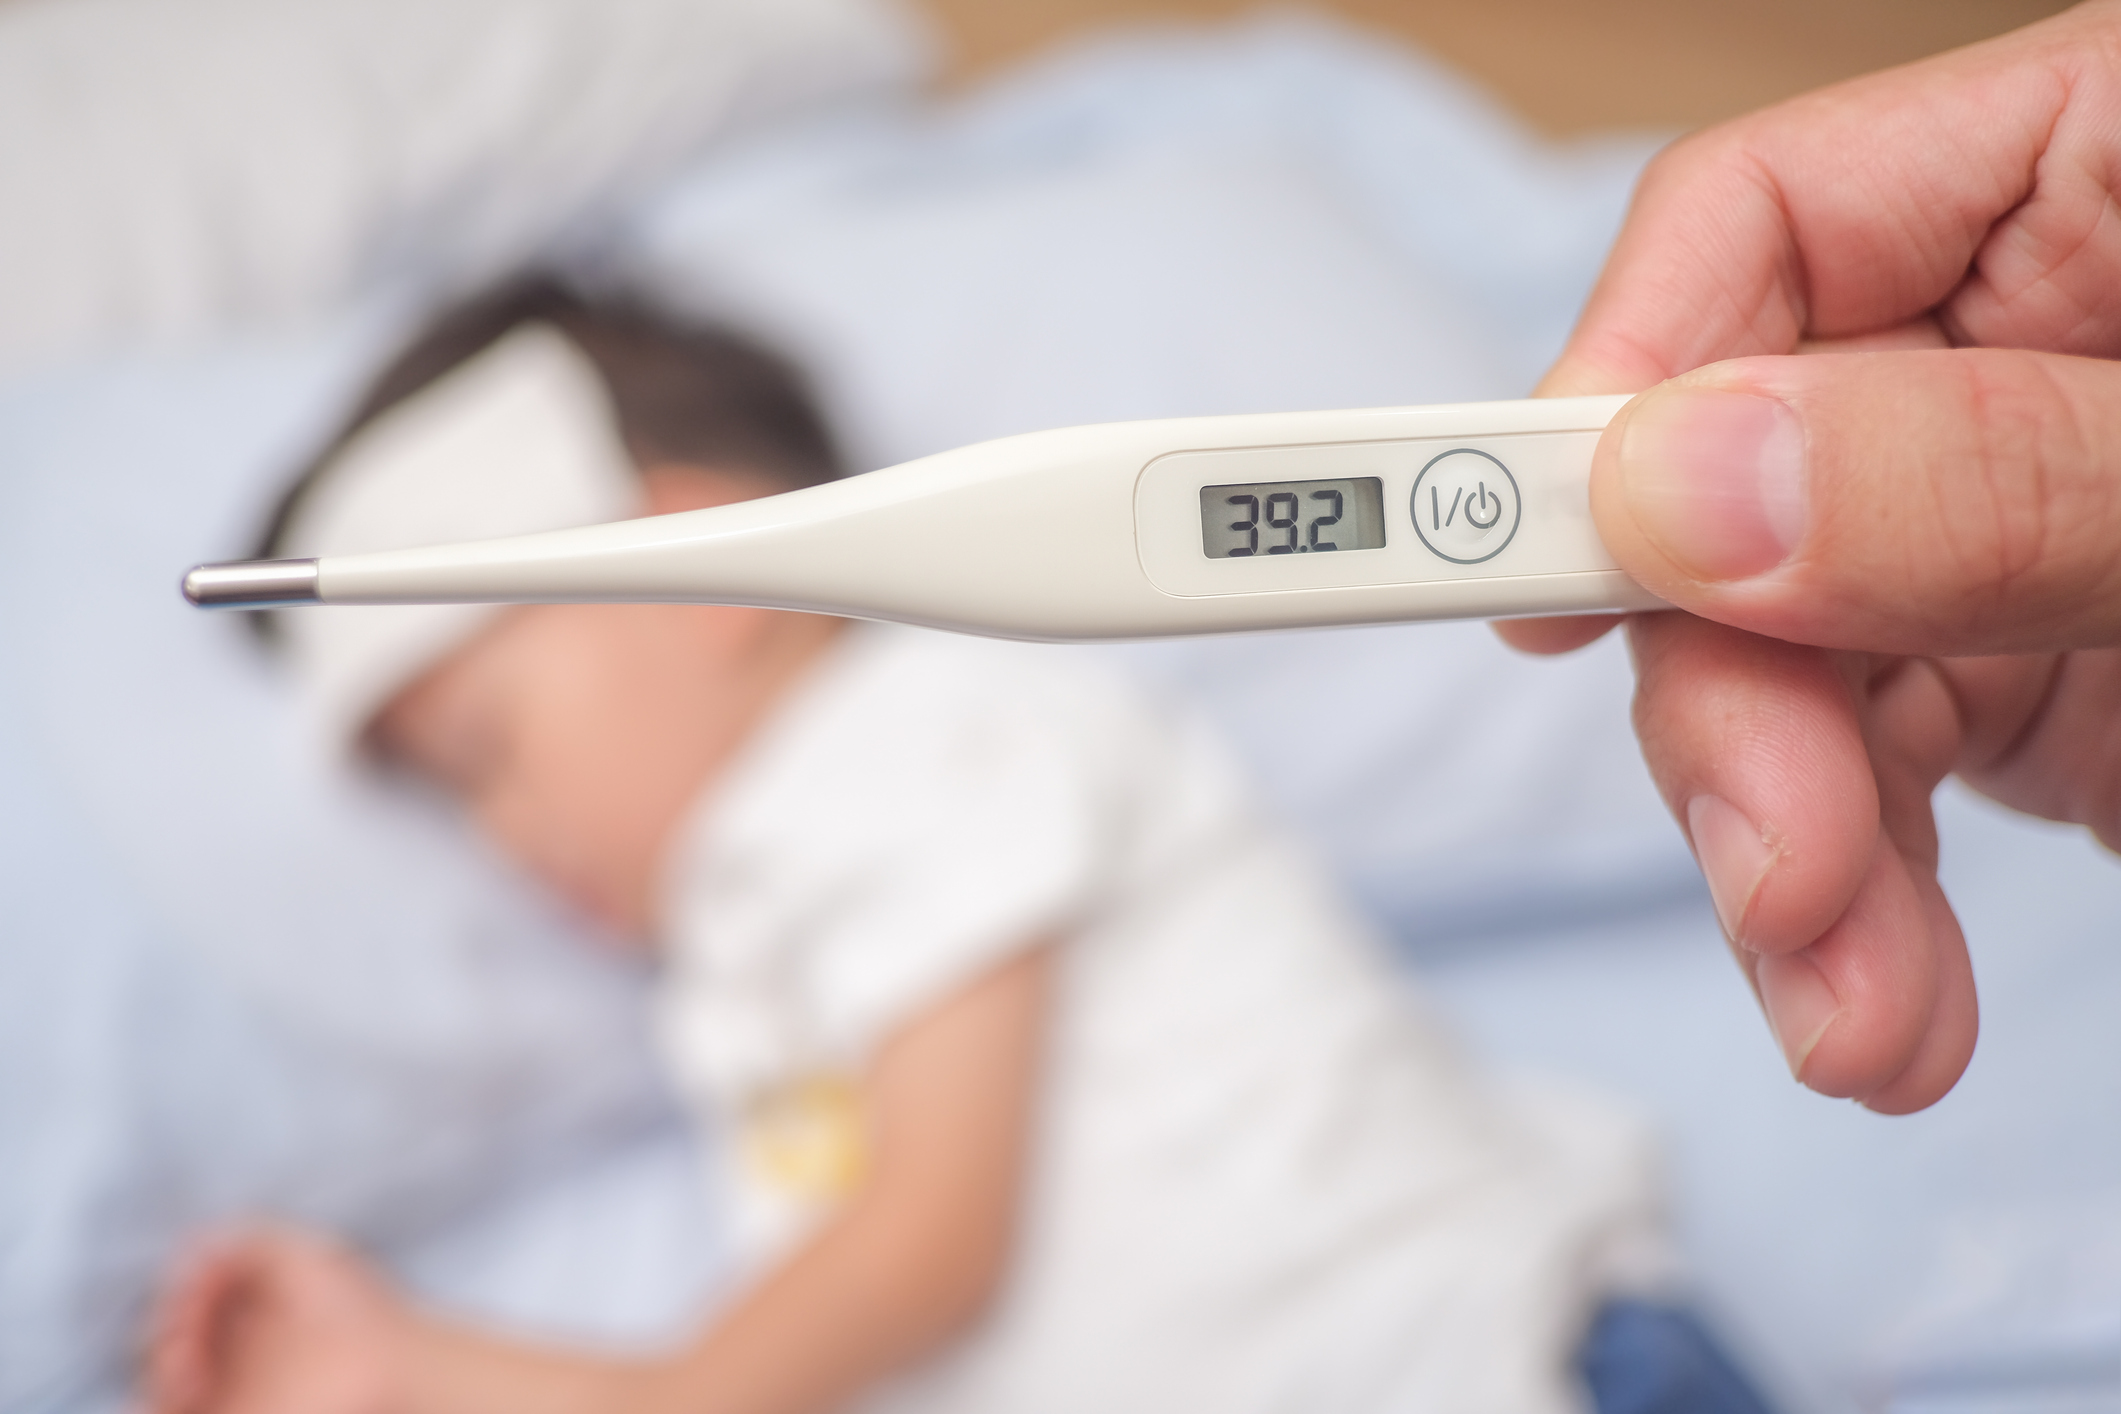 A thermometer marked 39.2 degrees is in hand.  In the background, out of focus, lies a child